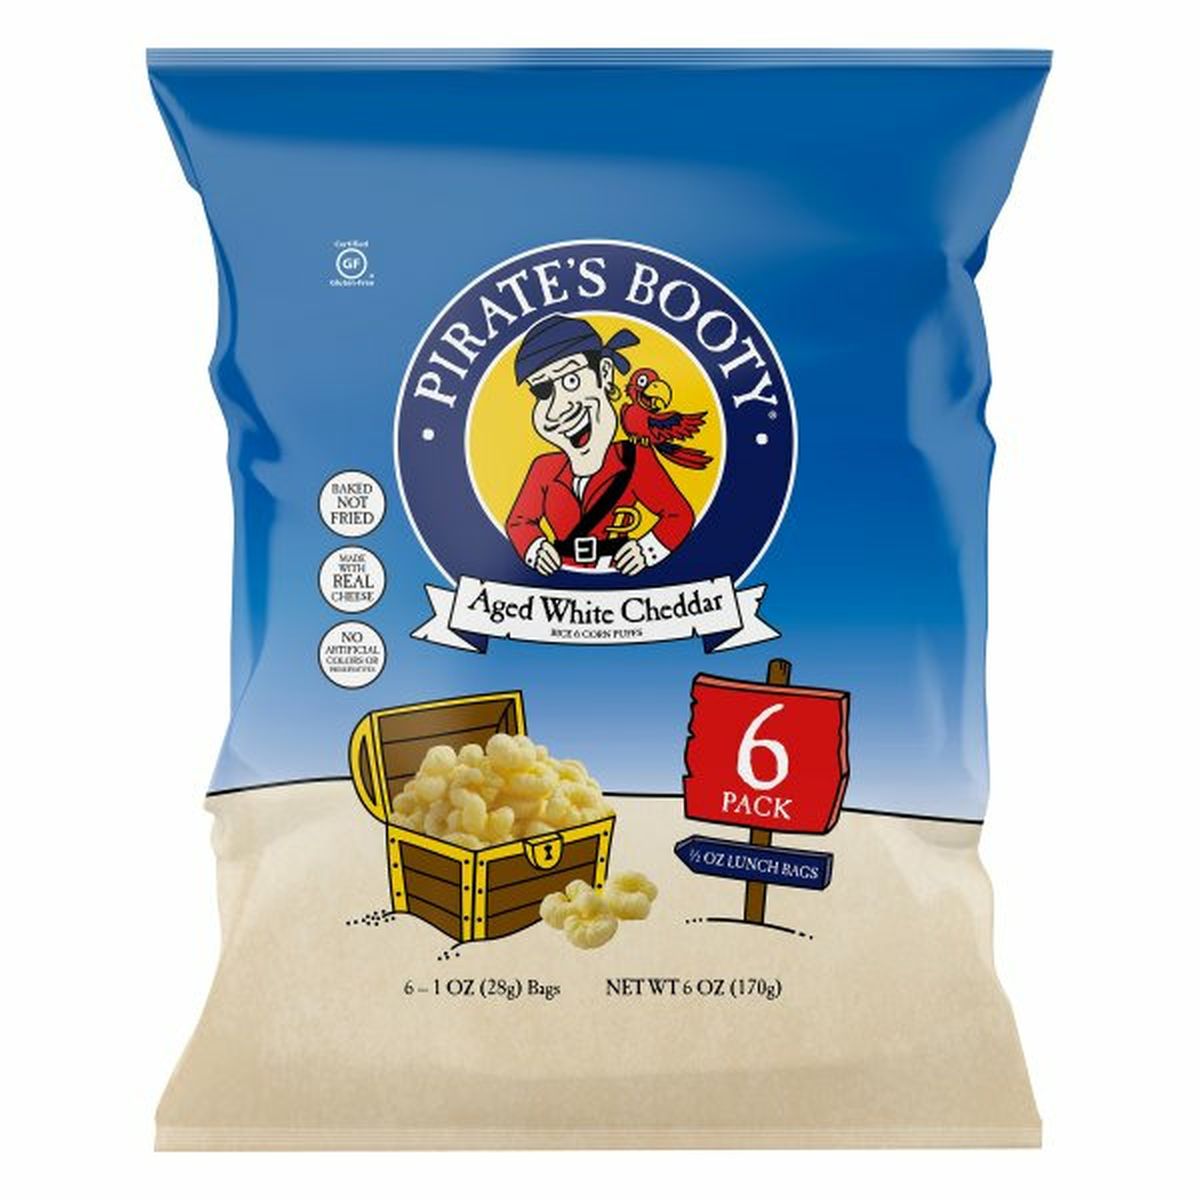 Calories in Pirate Brands Rice & Corn Puffs, Aged White Cheddar, 6 Pack